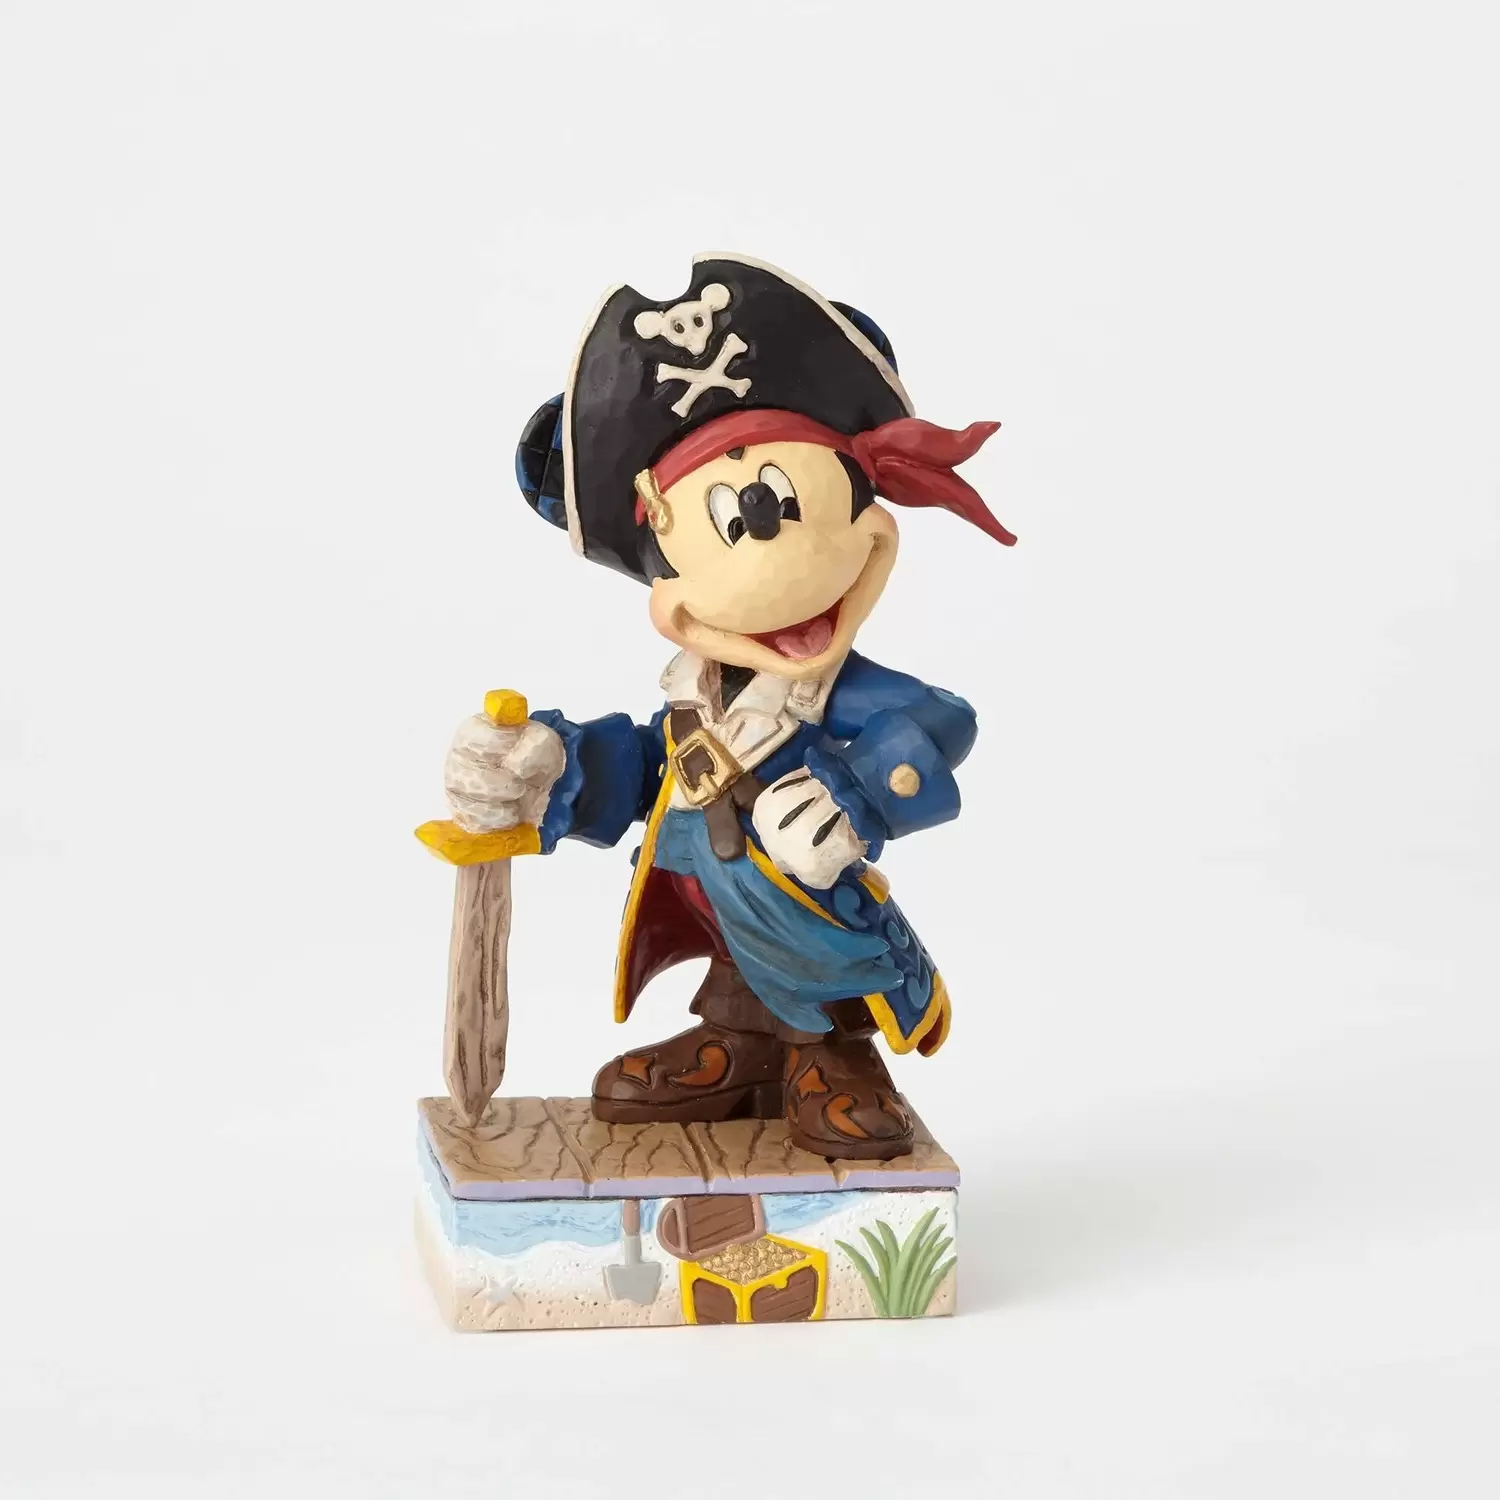 Disney Traditions by Jim Shore - Set Sail For Adventure - Pirate Mickey